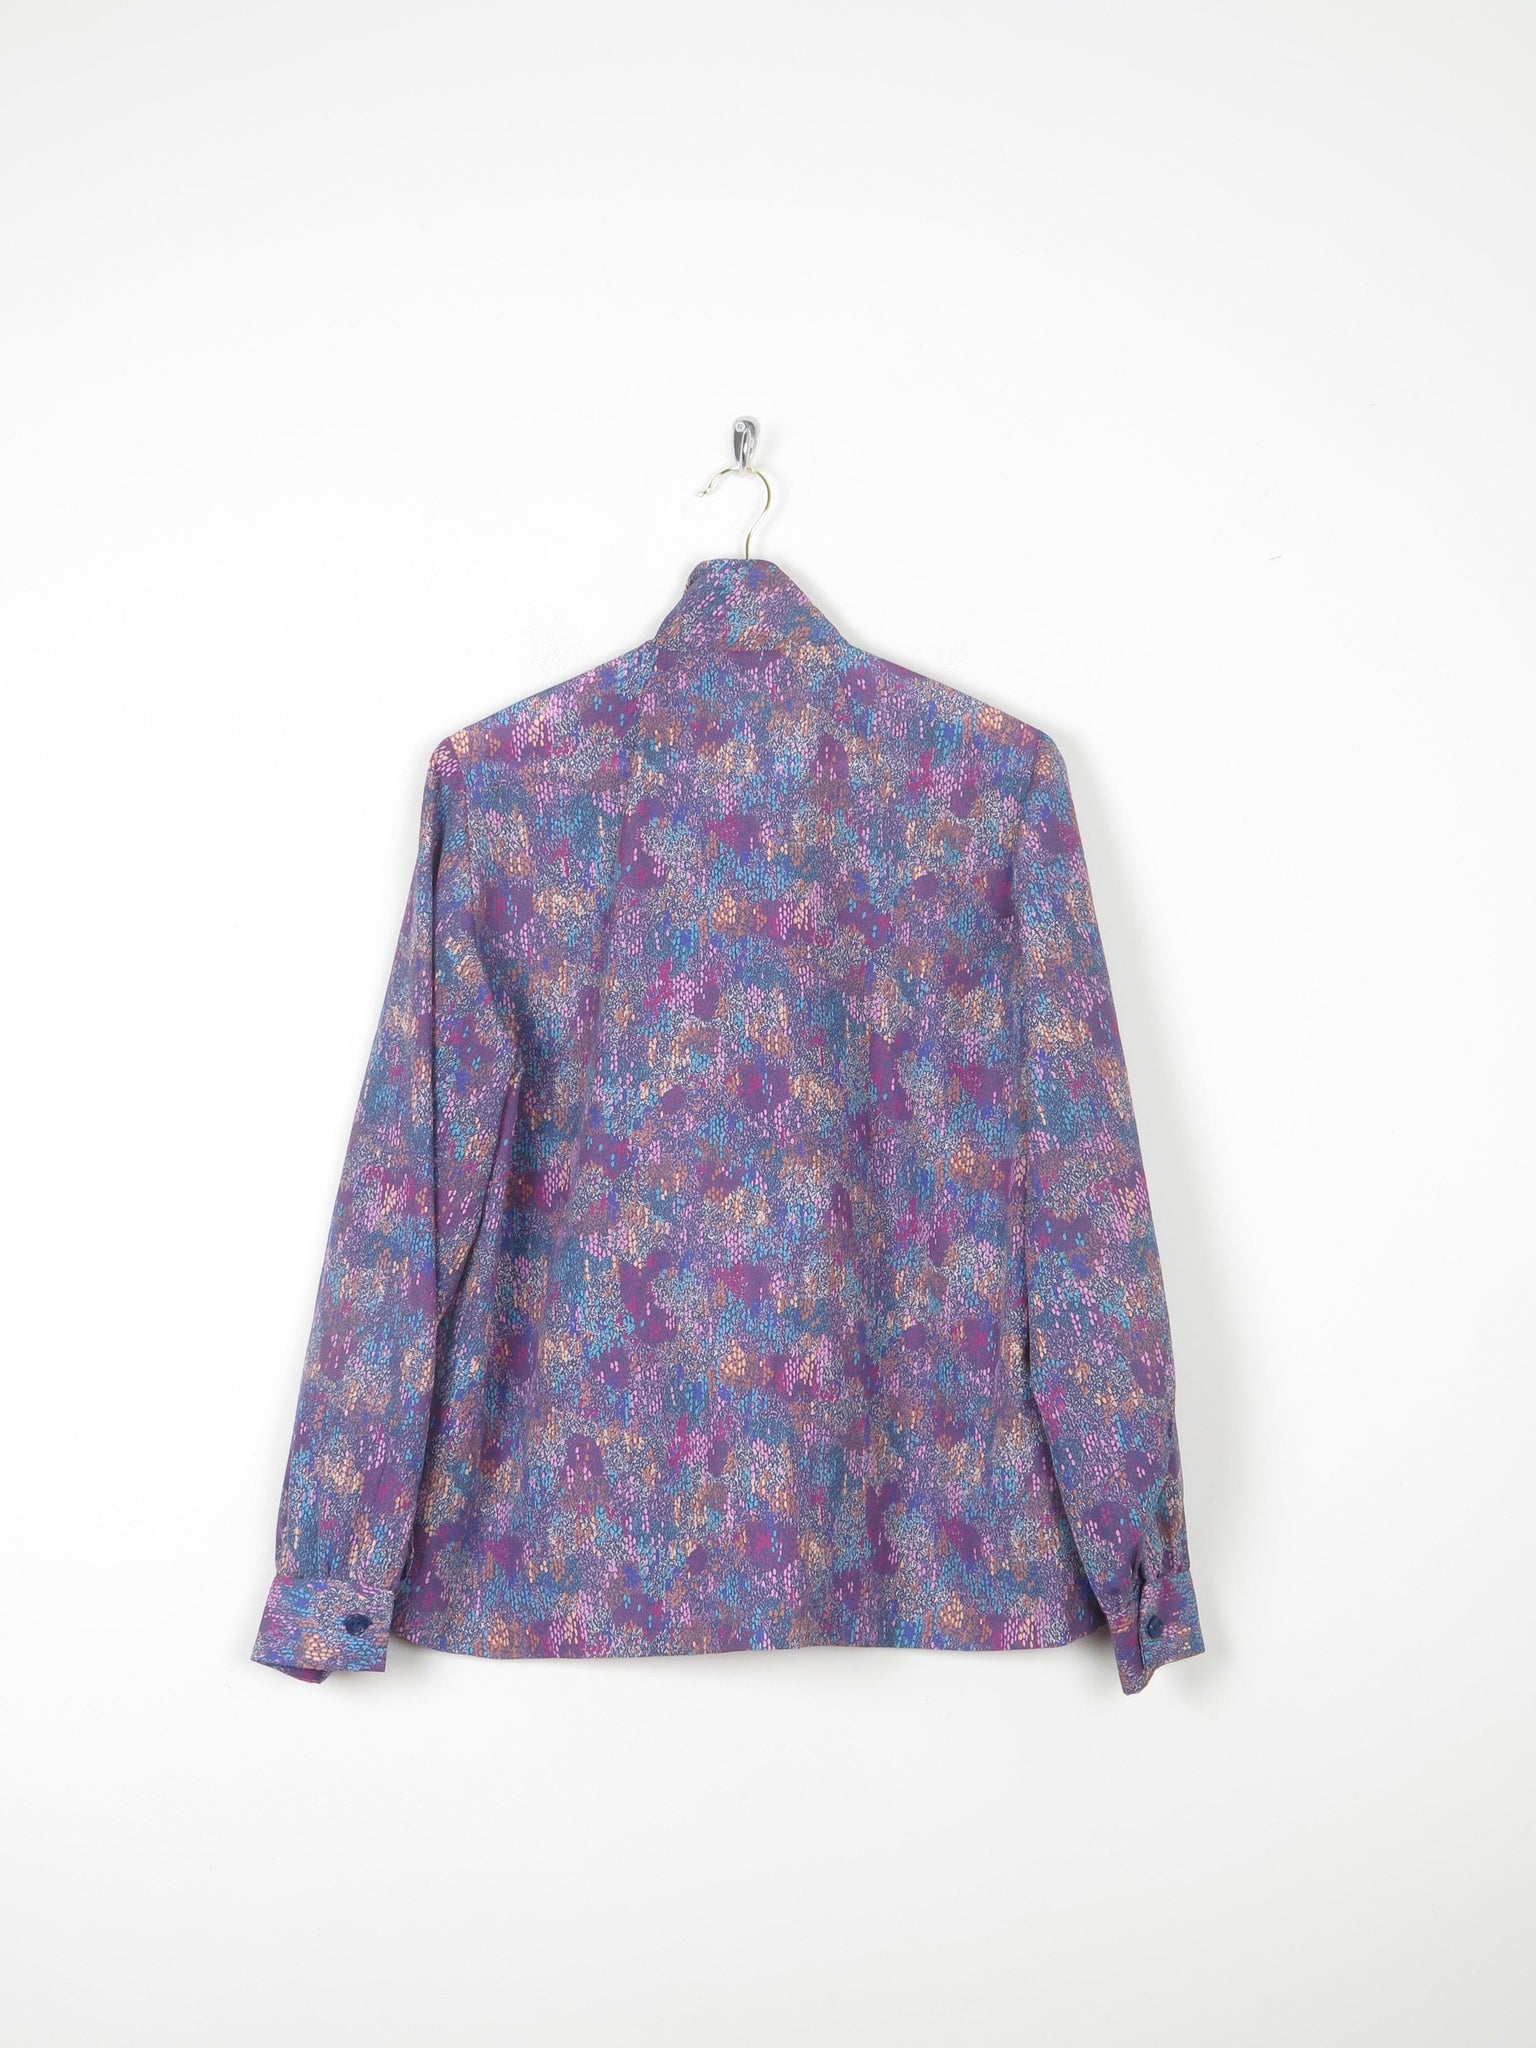 Women's Purple Printed Tie Neck blouse M/L 12/14 Approx - The Harlequin